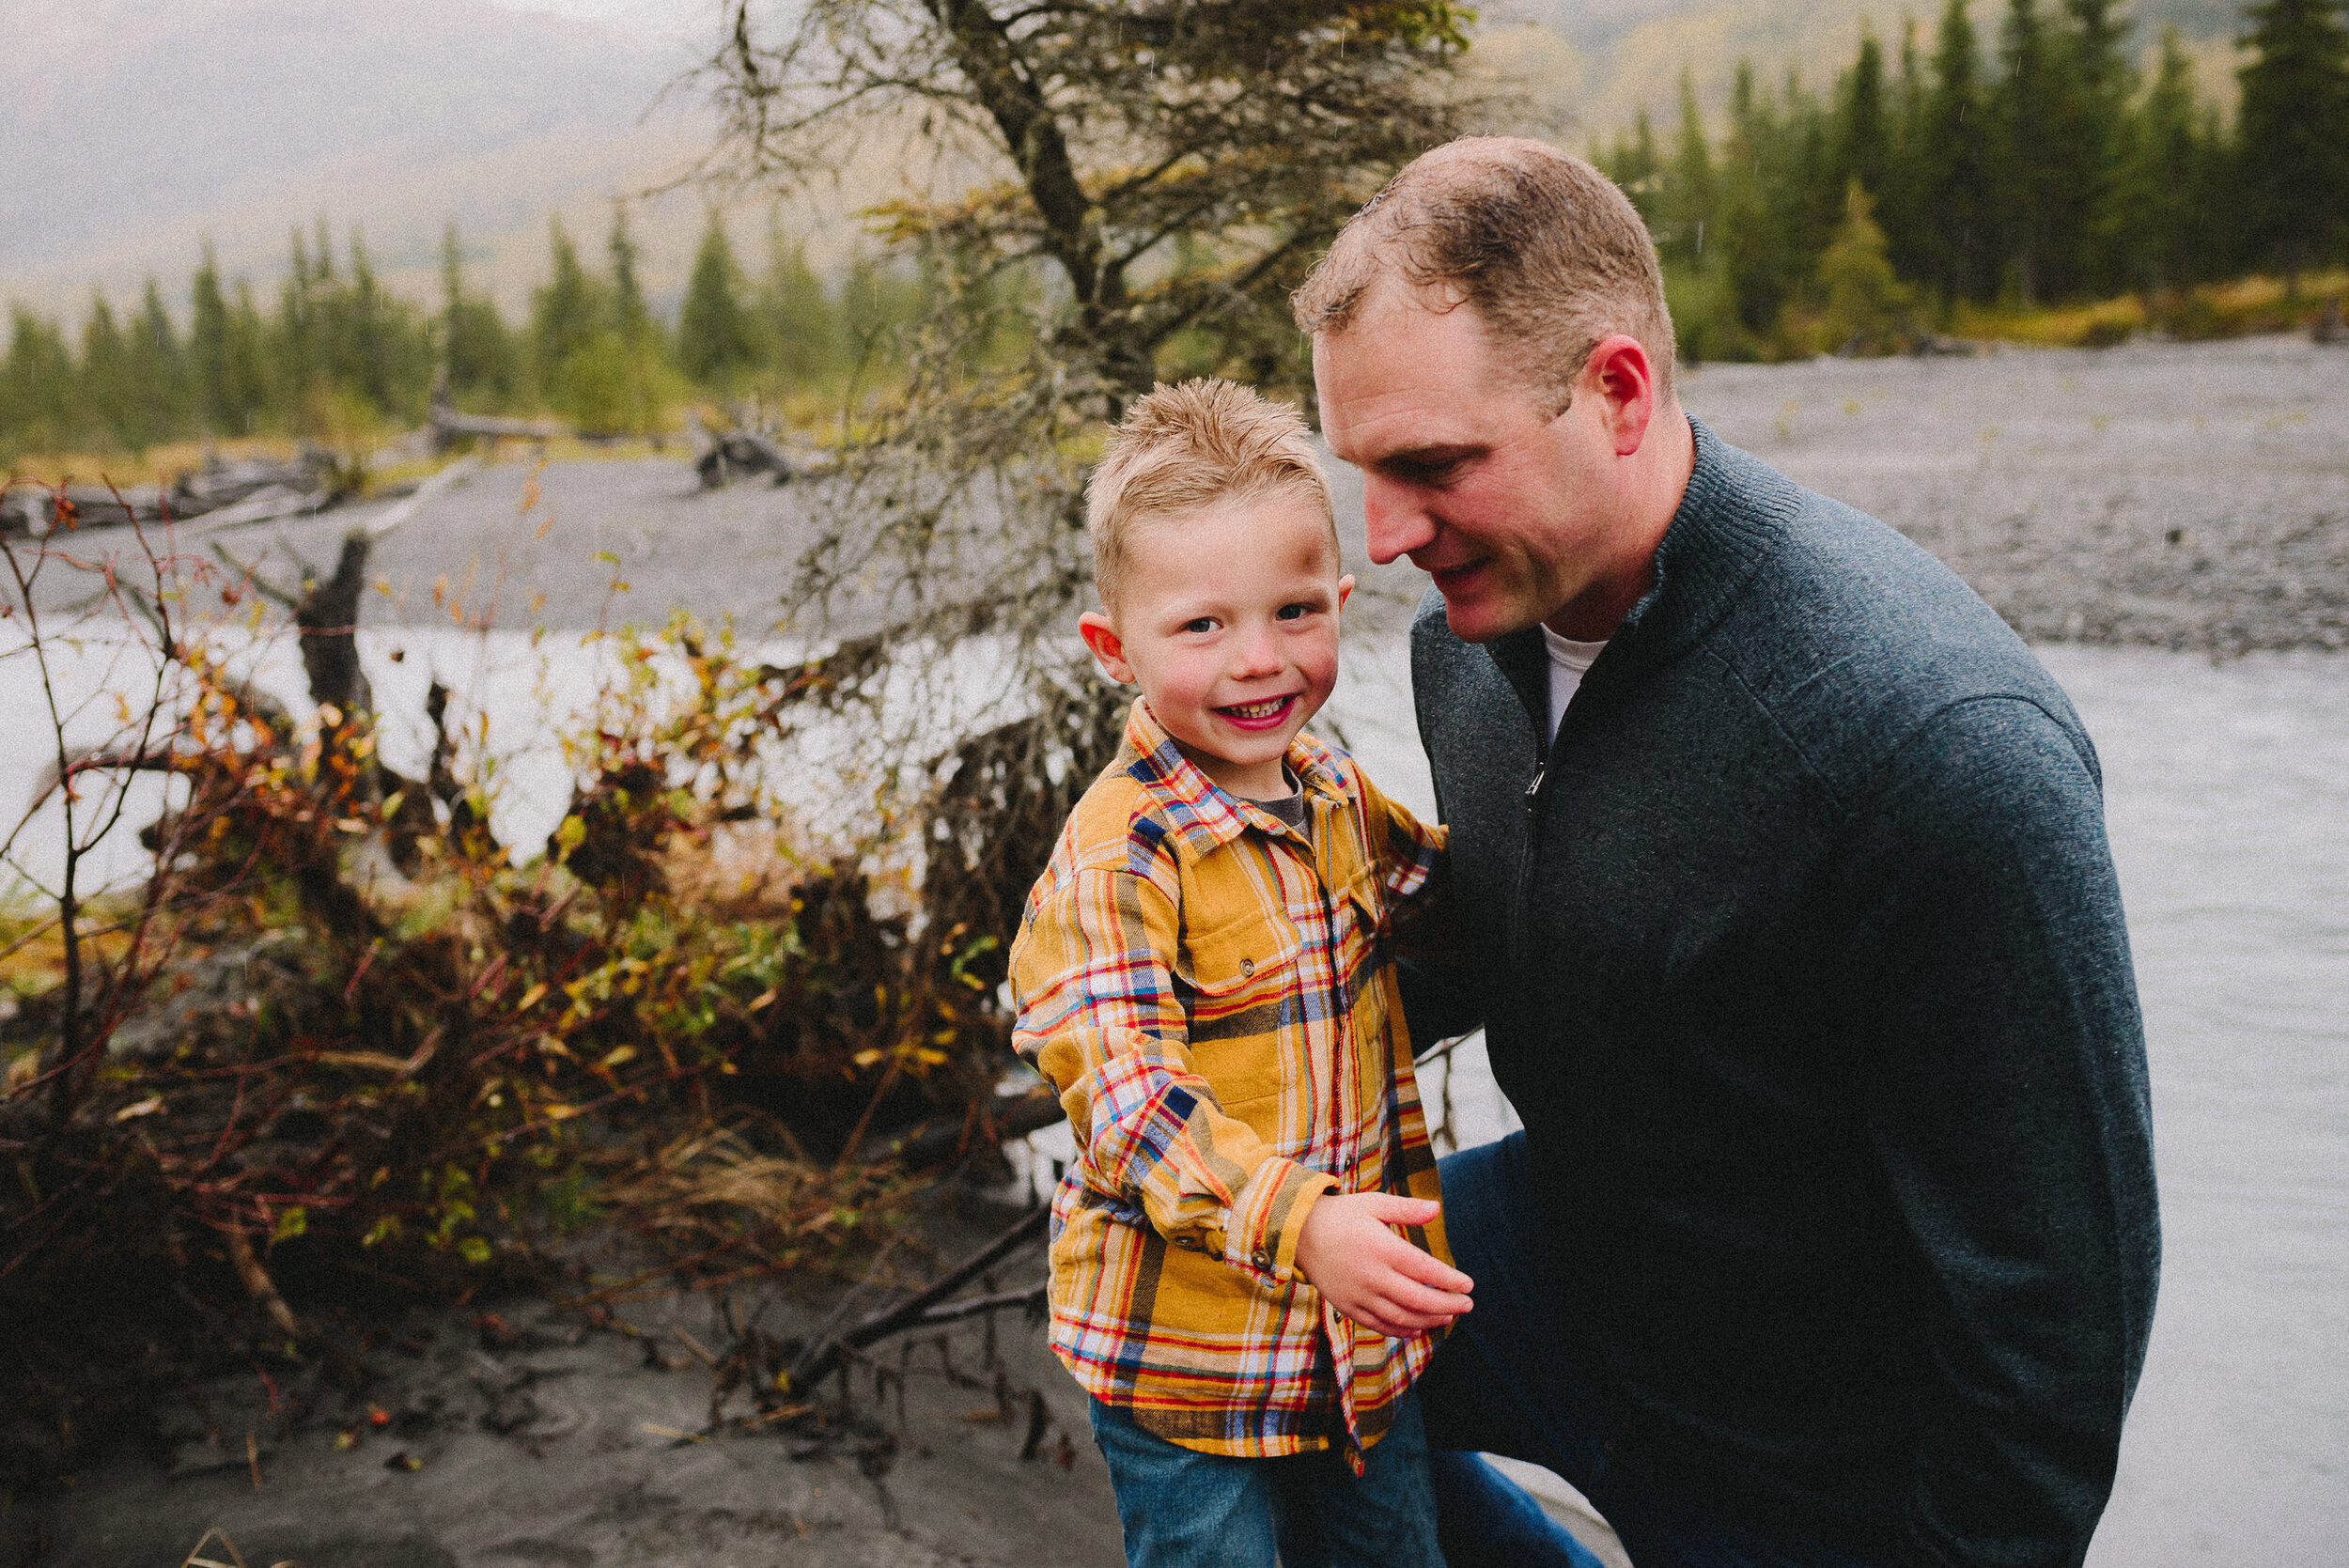 north-fork-eagle-river-fall-family-session-alaska-photographer-way-up-north-photography (227).jpg